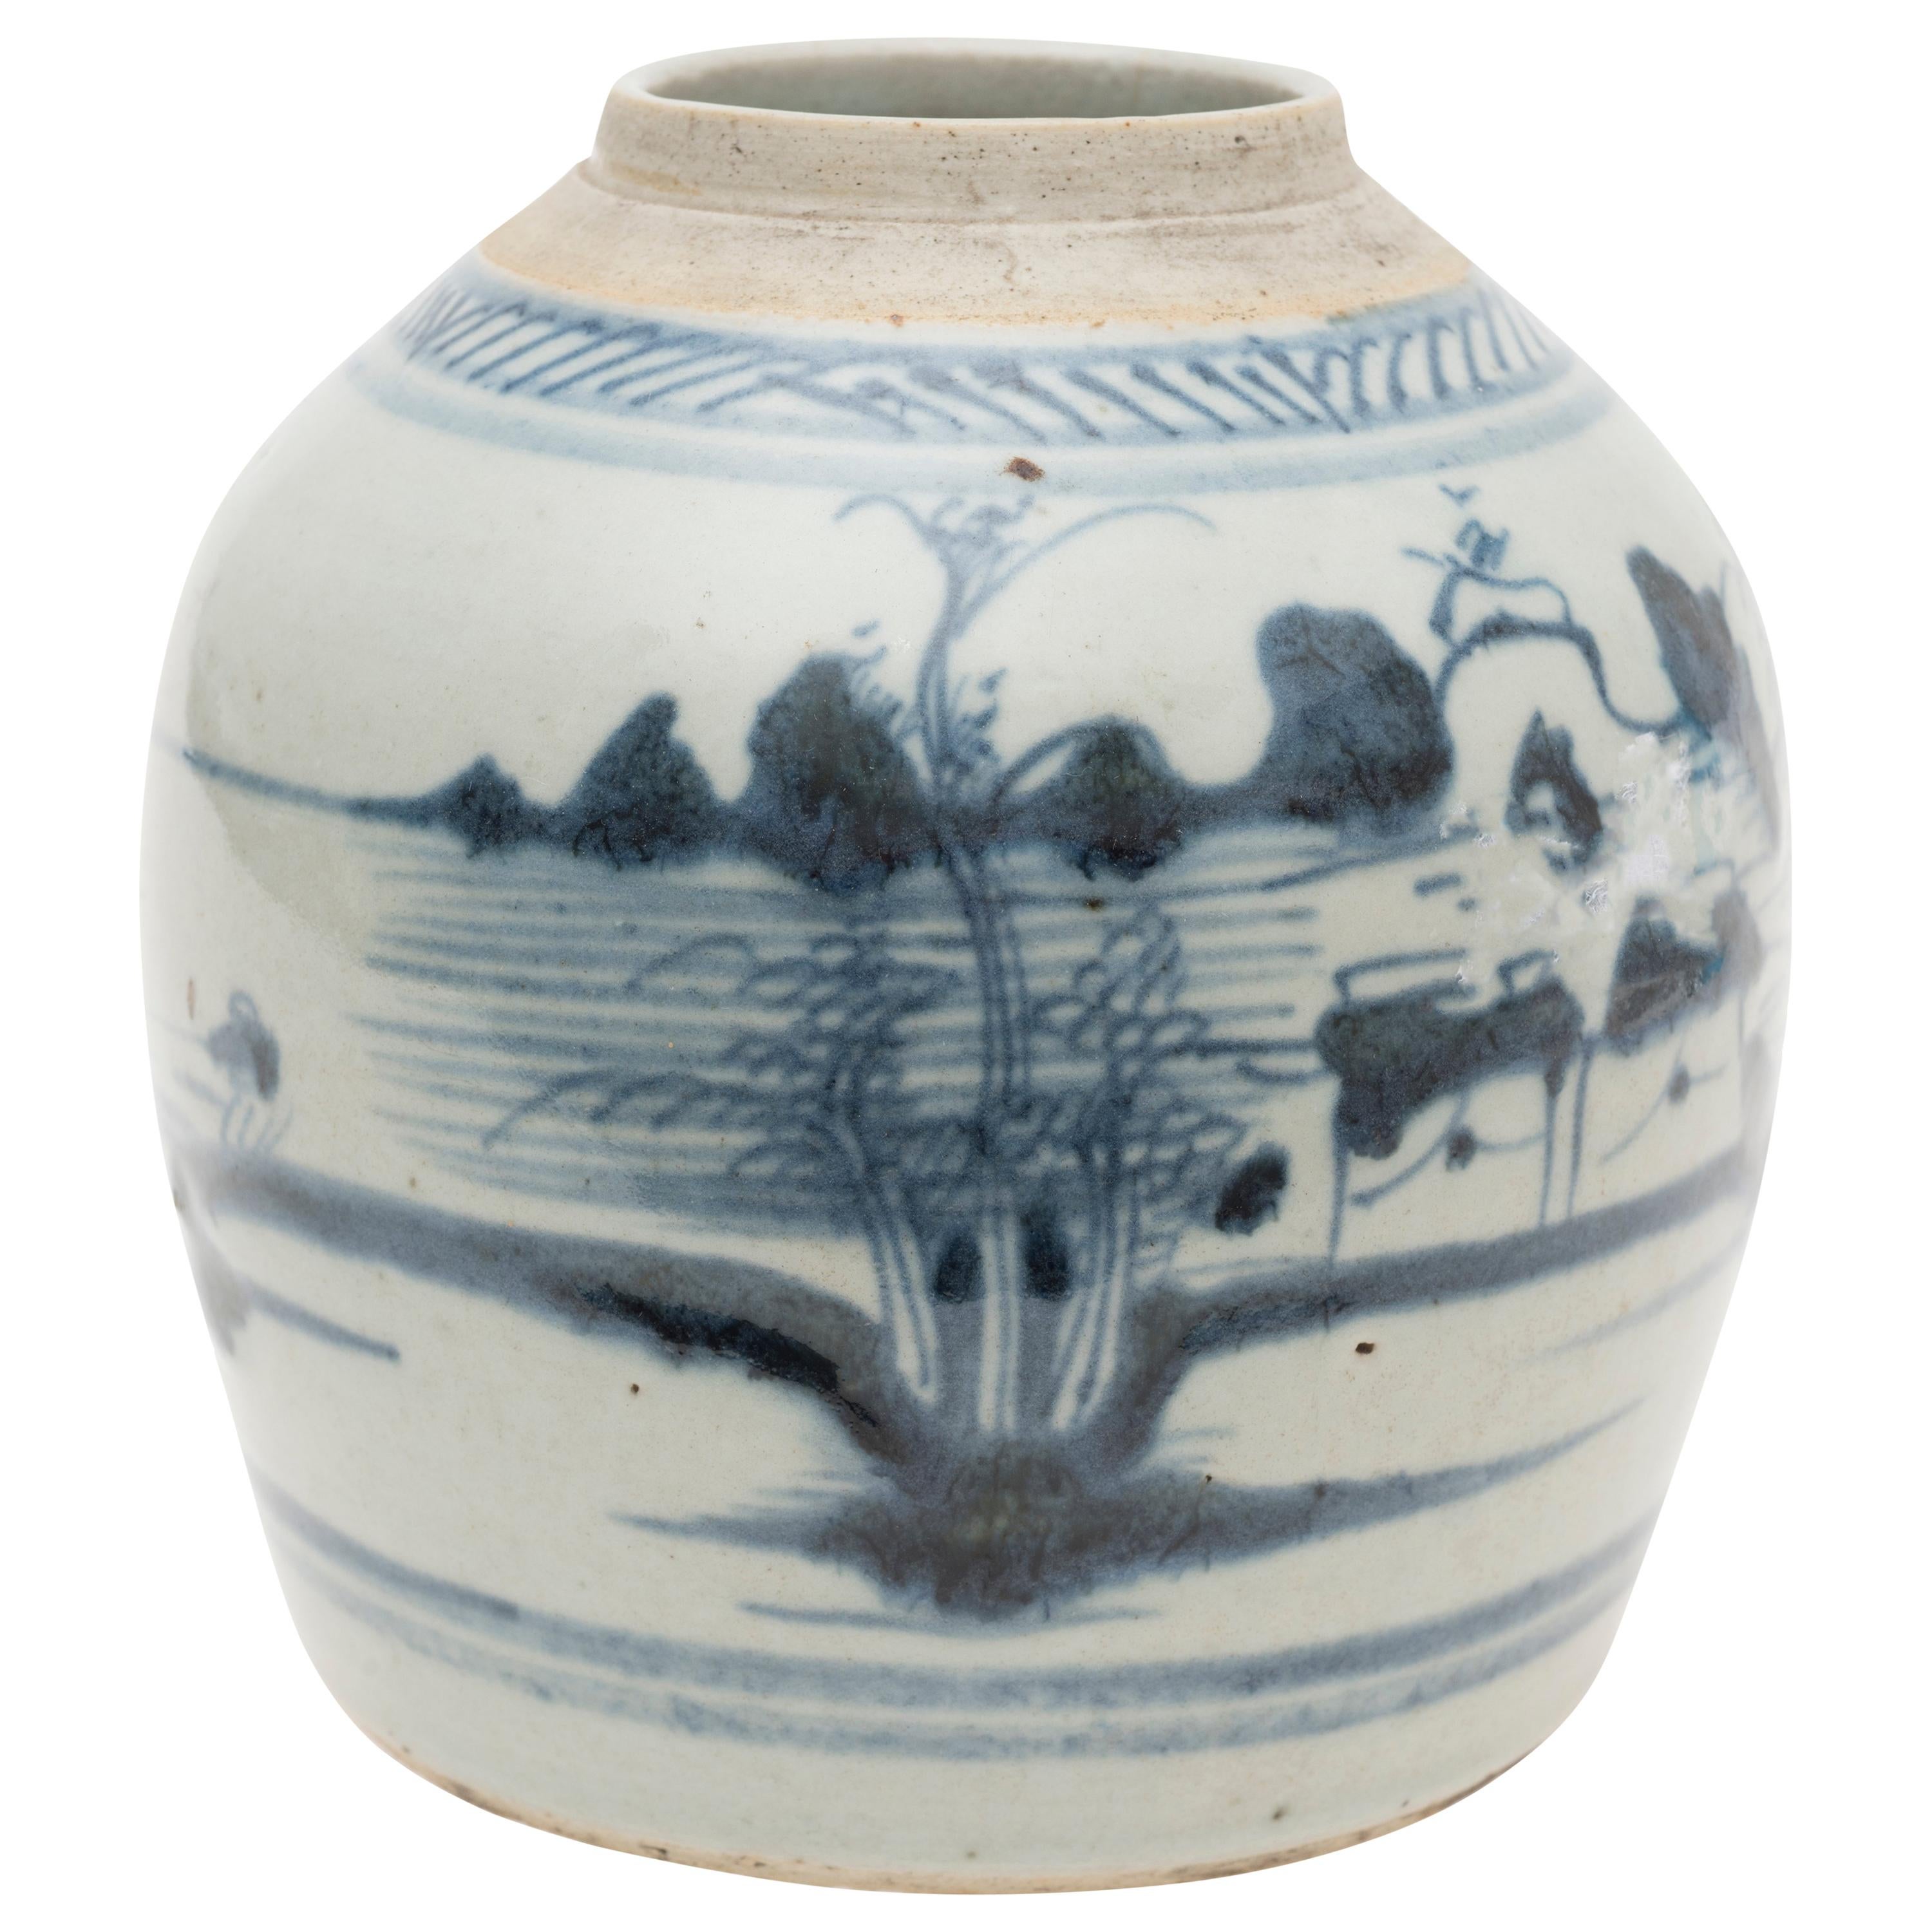 Ancient Ginger Vase, Ming Dynasty, China, Early 17th Century